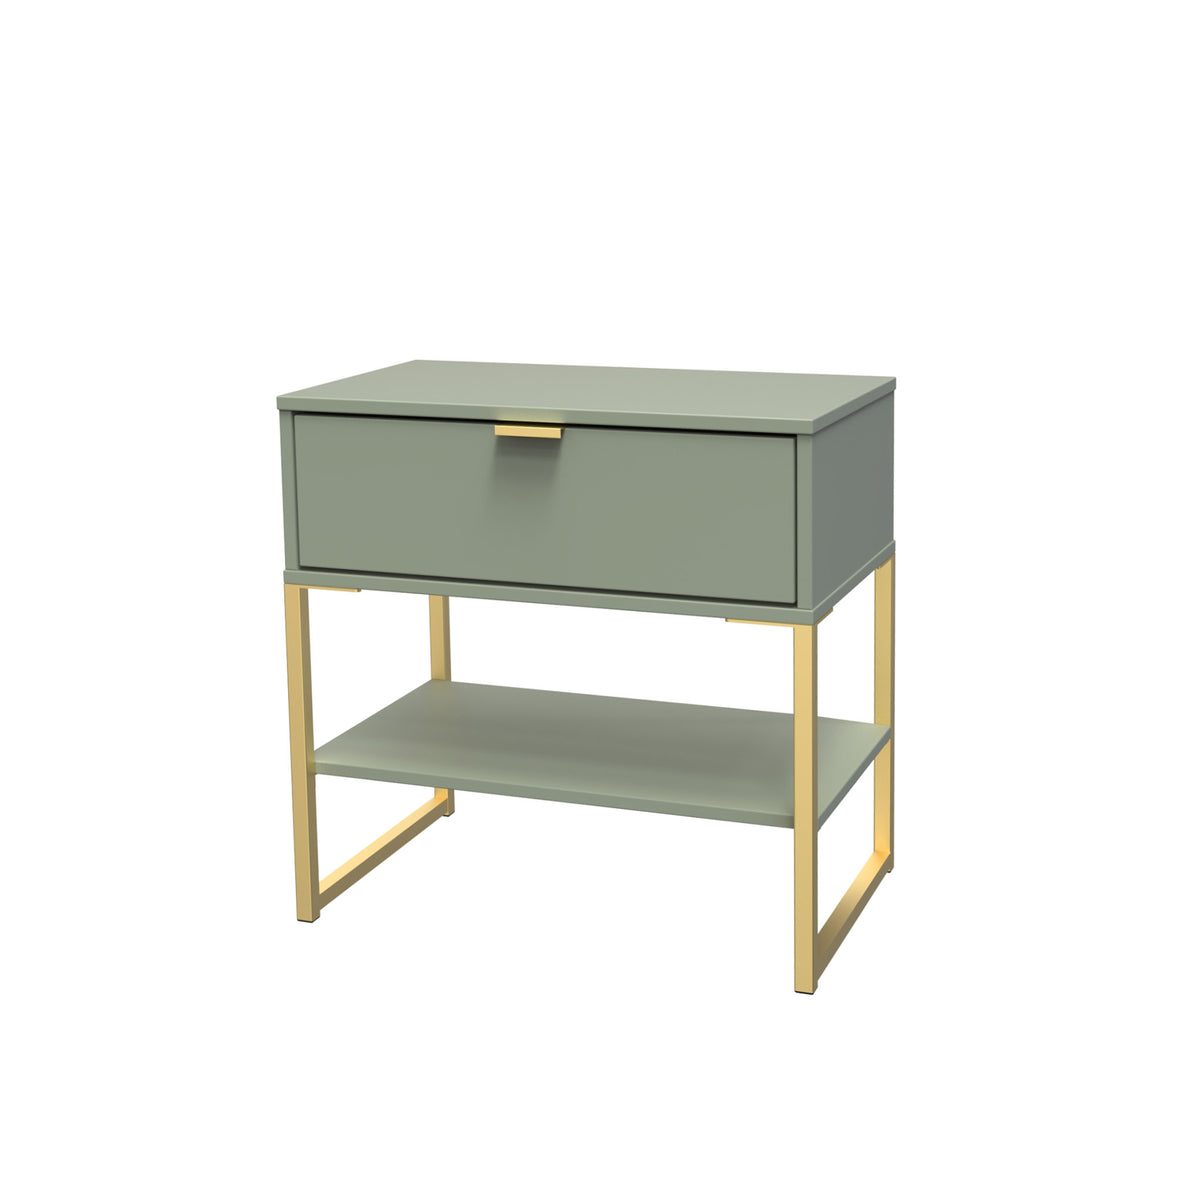 Hudson Olive 1 Drawer with Shelf Side Table with gold legs